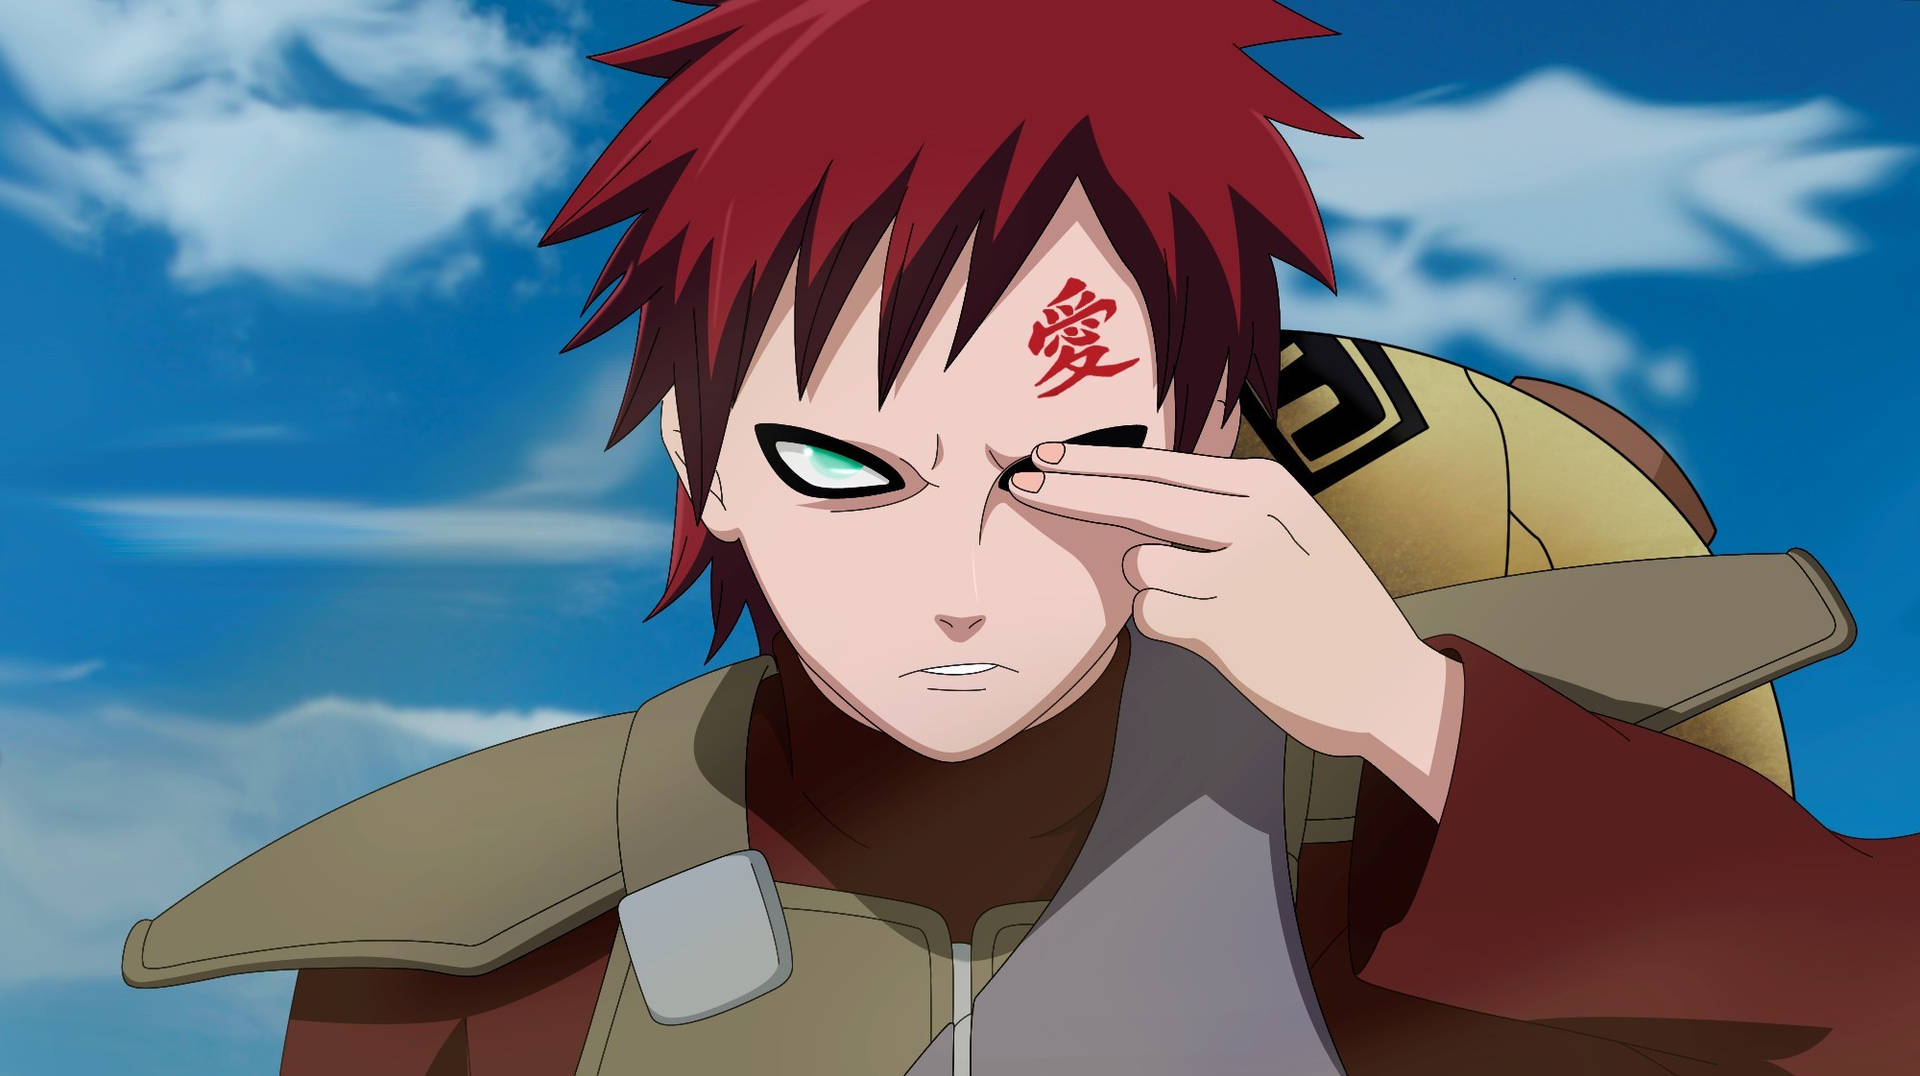 An Ipad Wallpaper Of Gaara From The Anime Series Naruto Focusing And Staring At Something, With Two Of His Fingers Covering His Right Eye. Picture